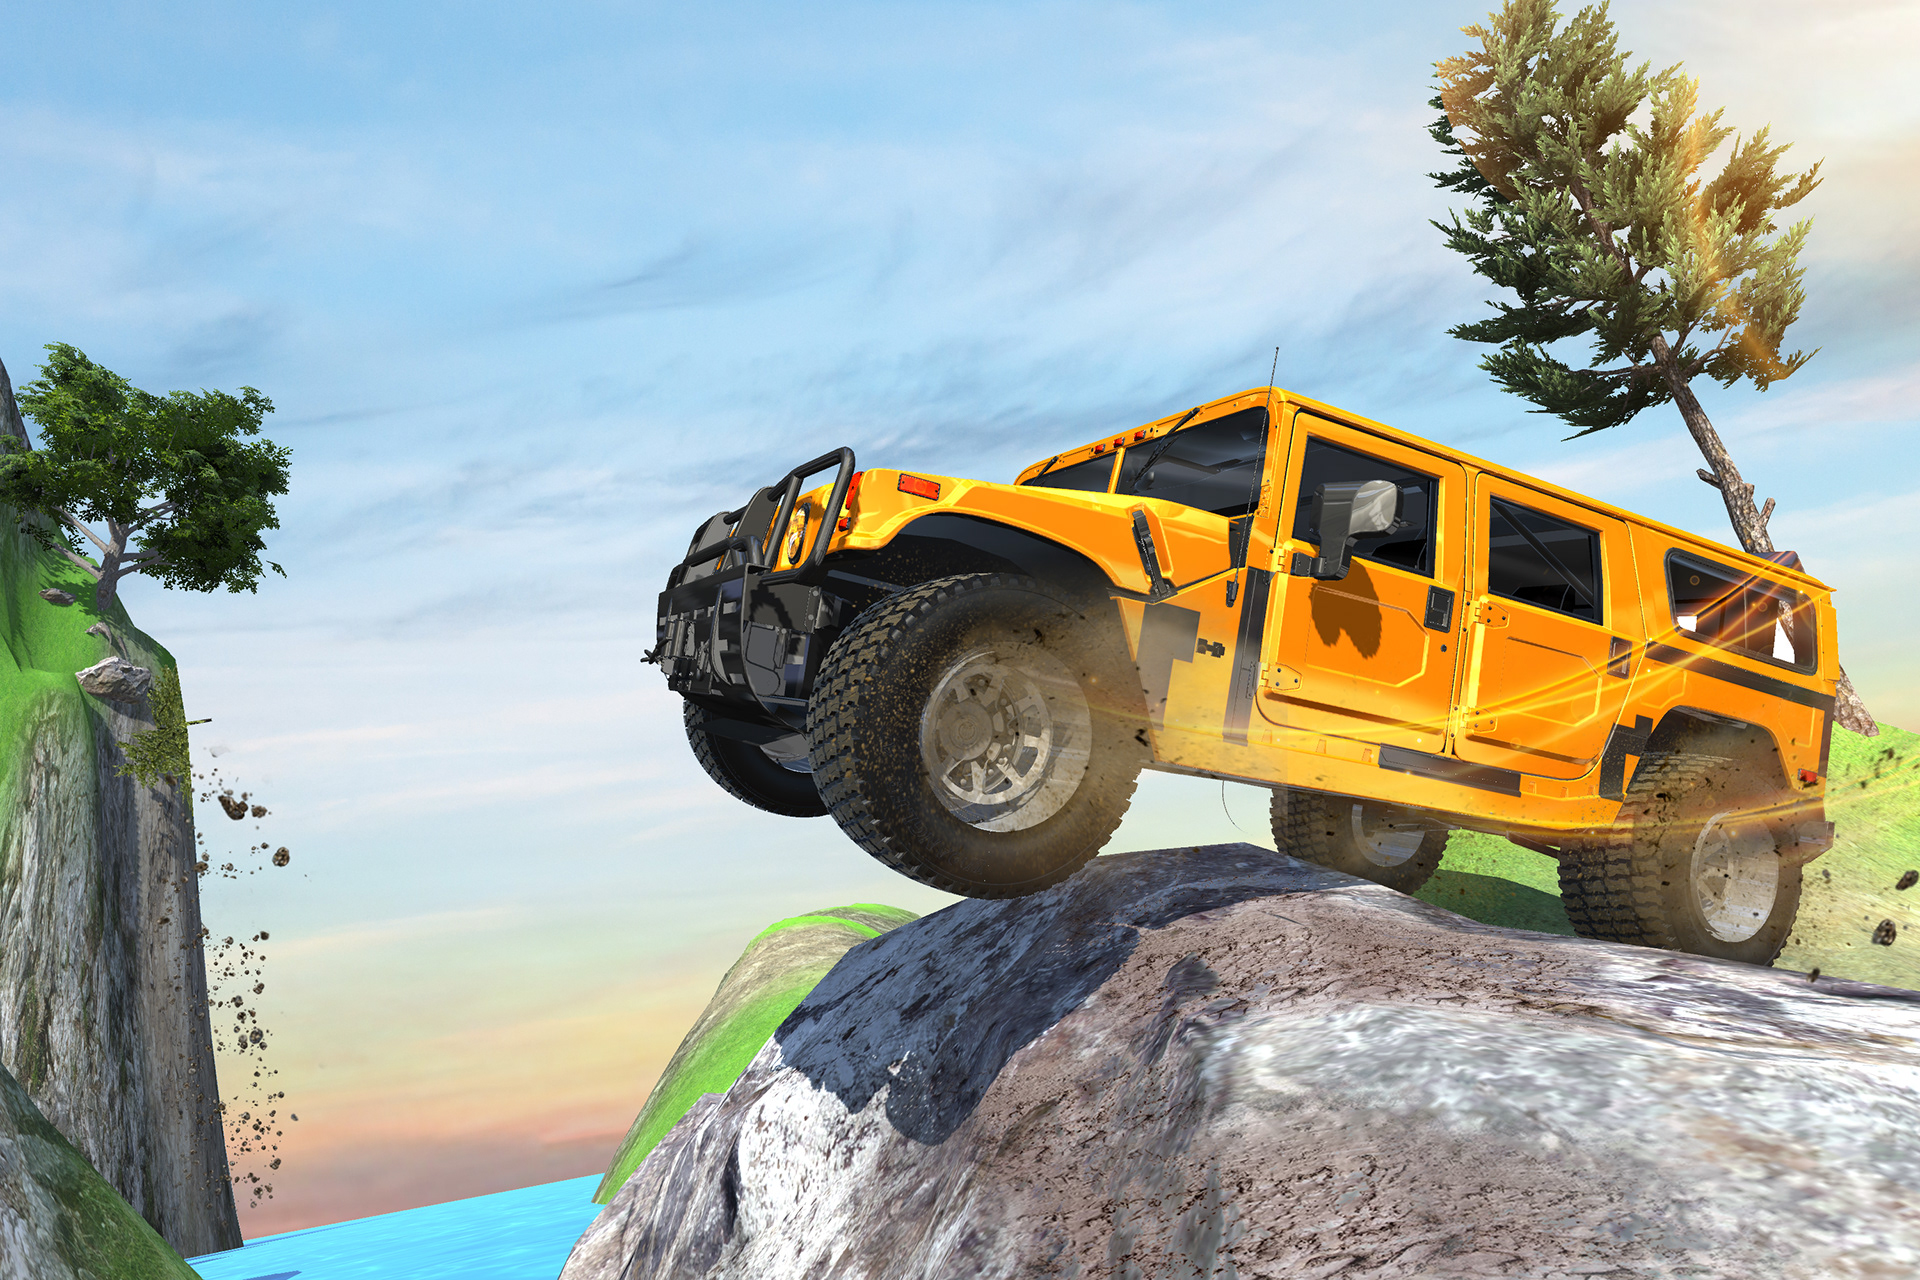 Offroad car driving game все открыта. Offroad Jeep Simulator. Offroad Simulator - Jeep Driving. Offroad SUV 4x4 Driving Hill. 4x4 SUV off Road Driving.